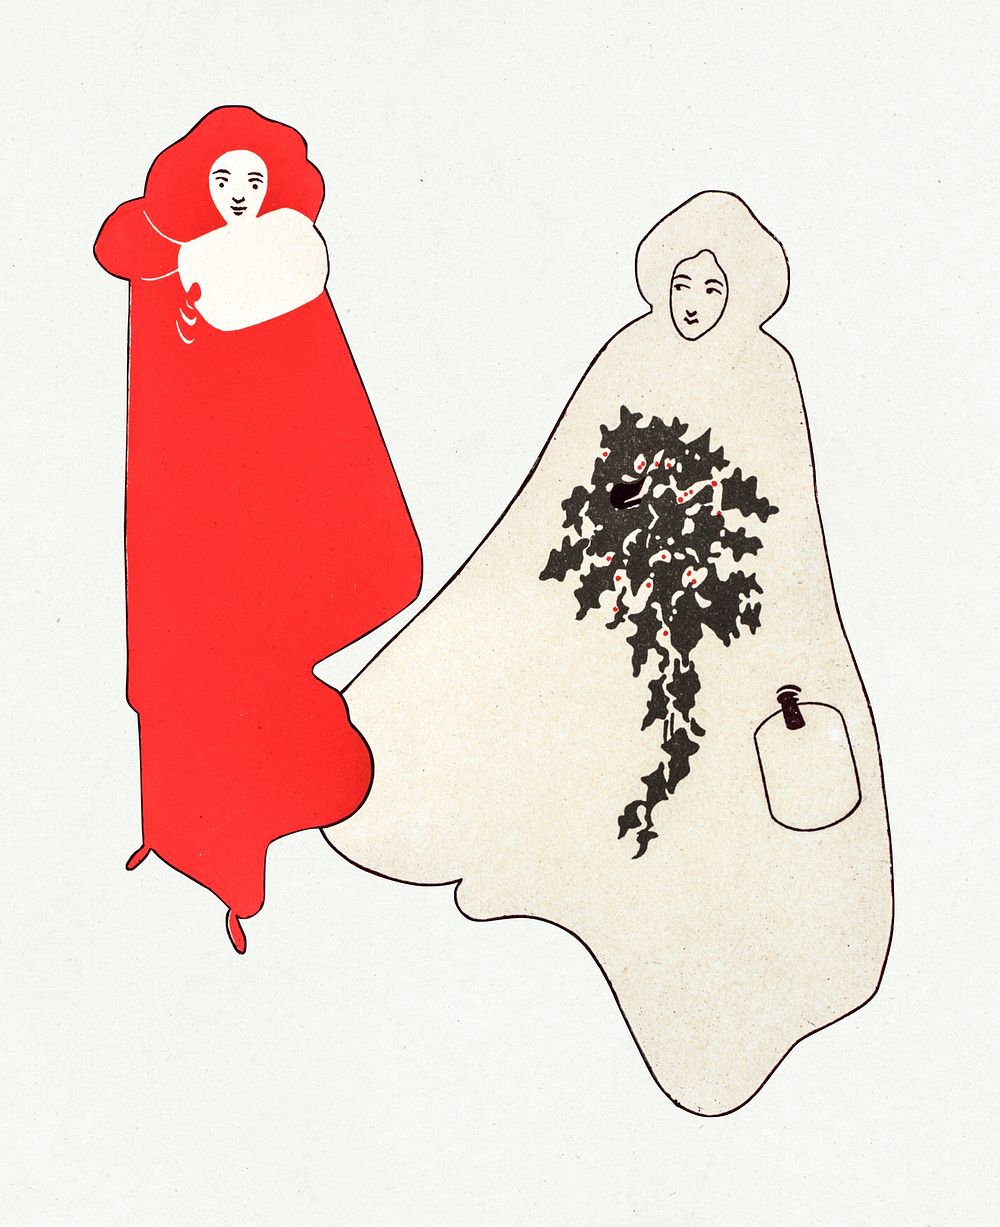 Women in red and white cloaks illustration